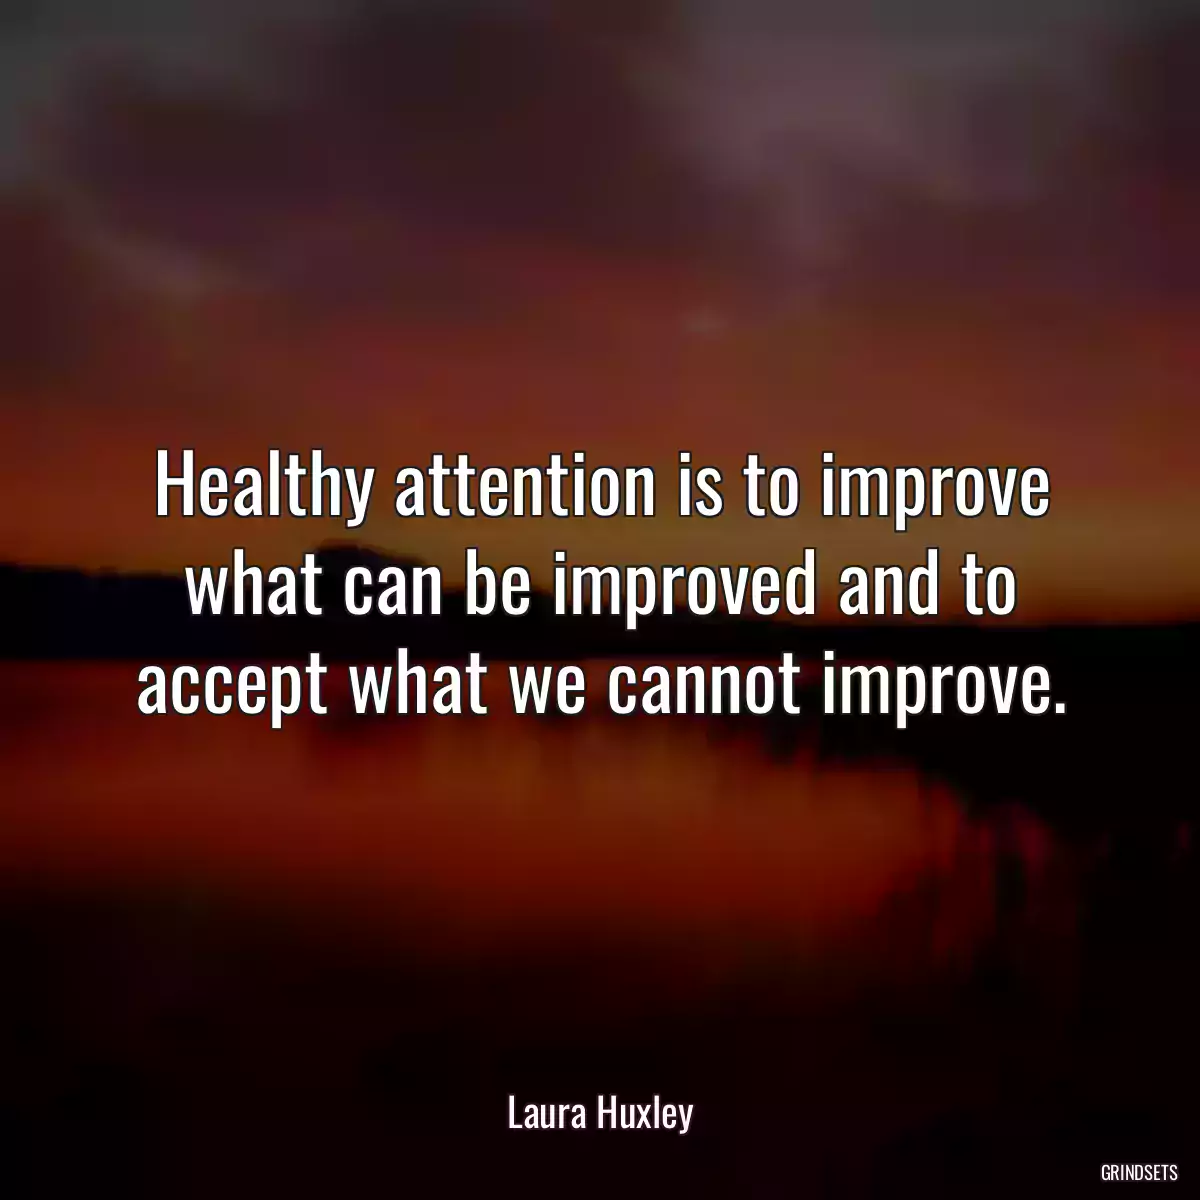 Healthy attention is to improve what can be improved and to accept what we cannot improve.